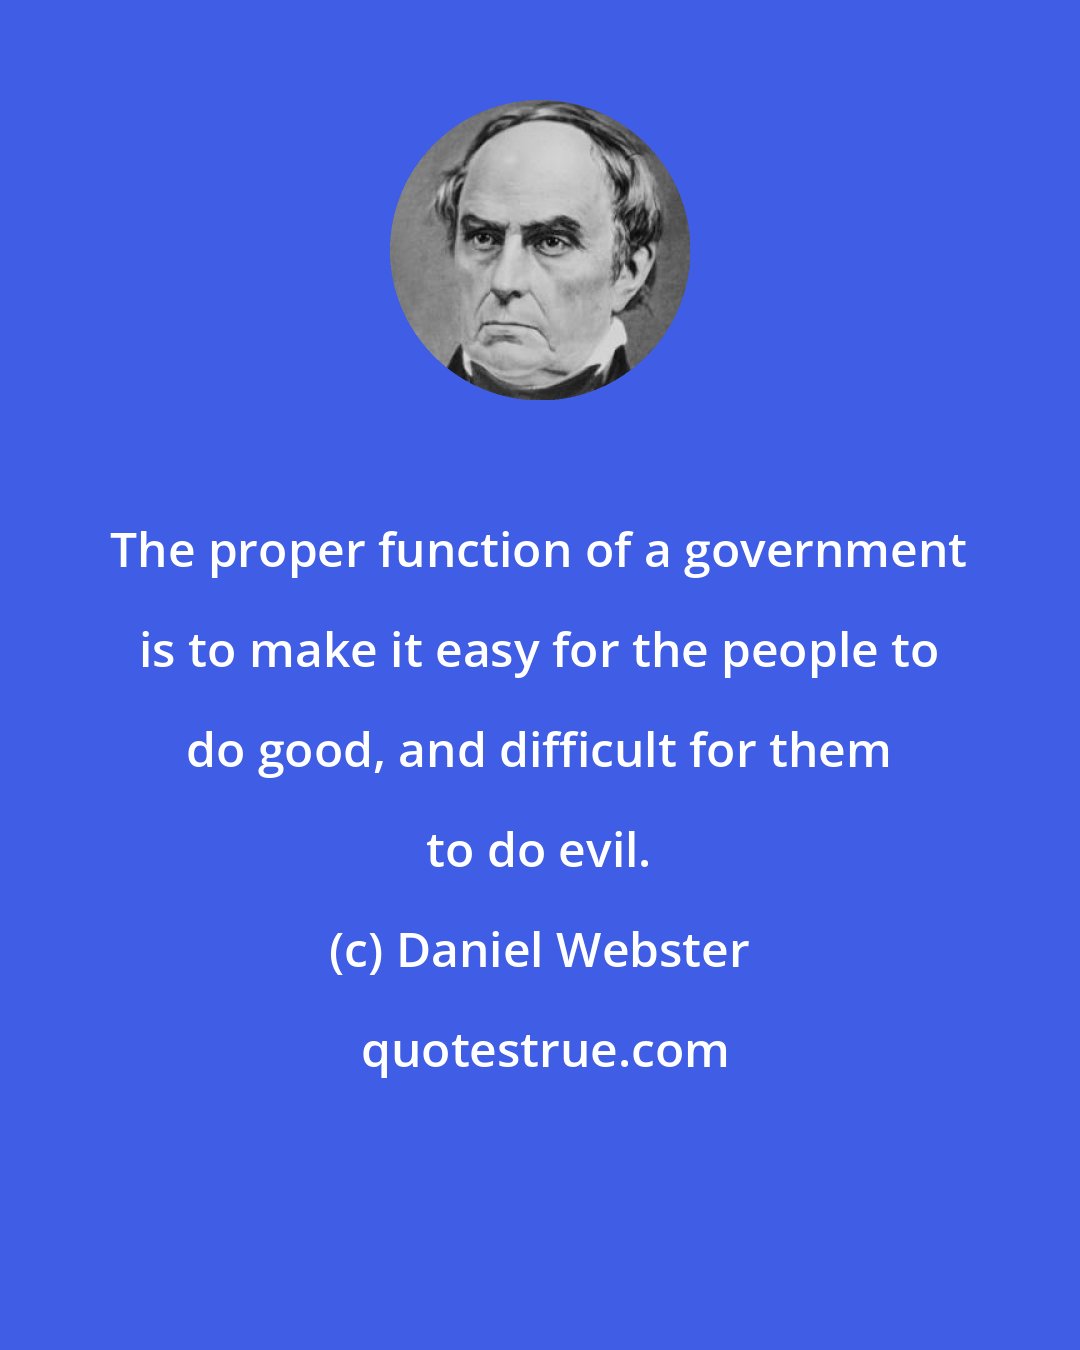 Daniel Webster: The proper function of a government is to make it easy for the people to do good, and difficult for them to do evil.